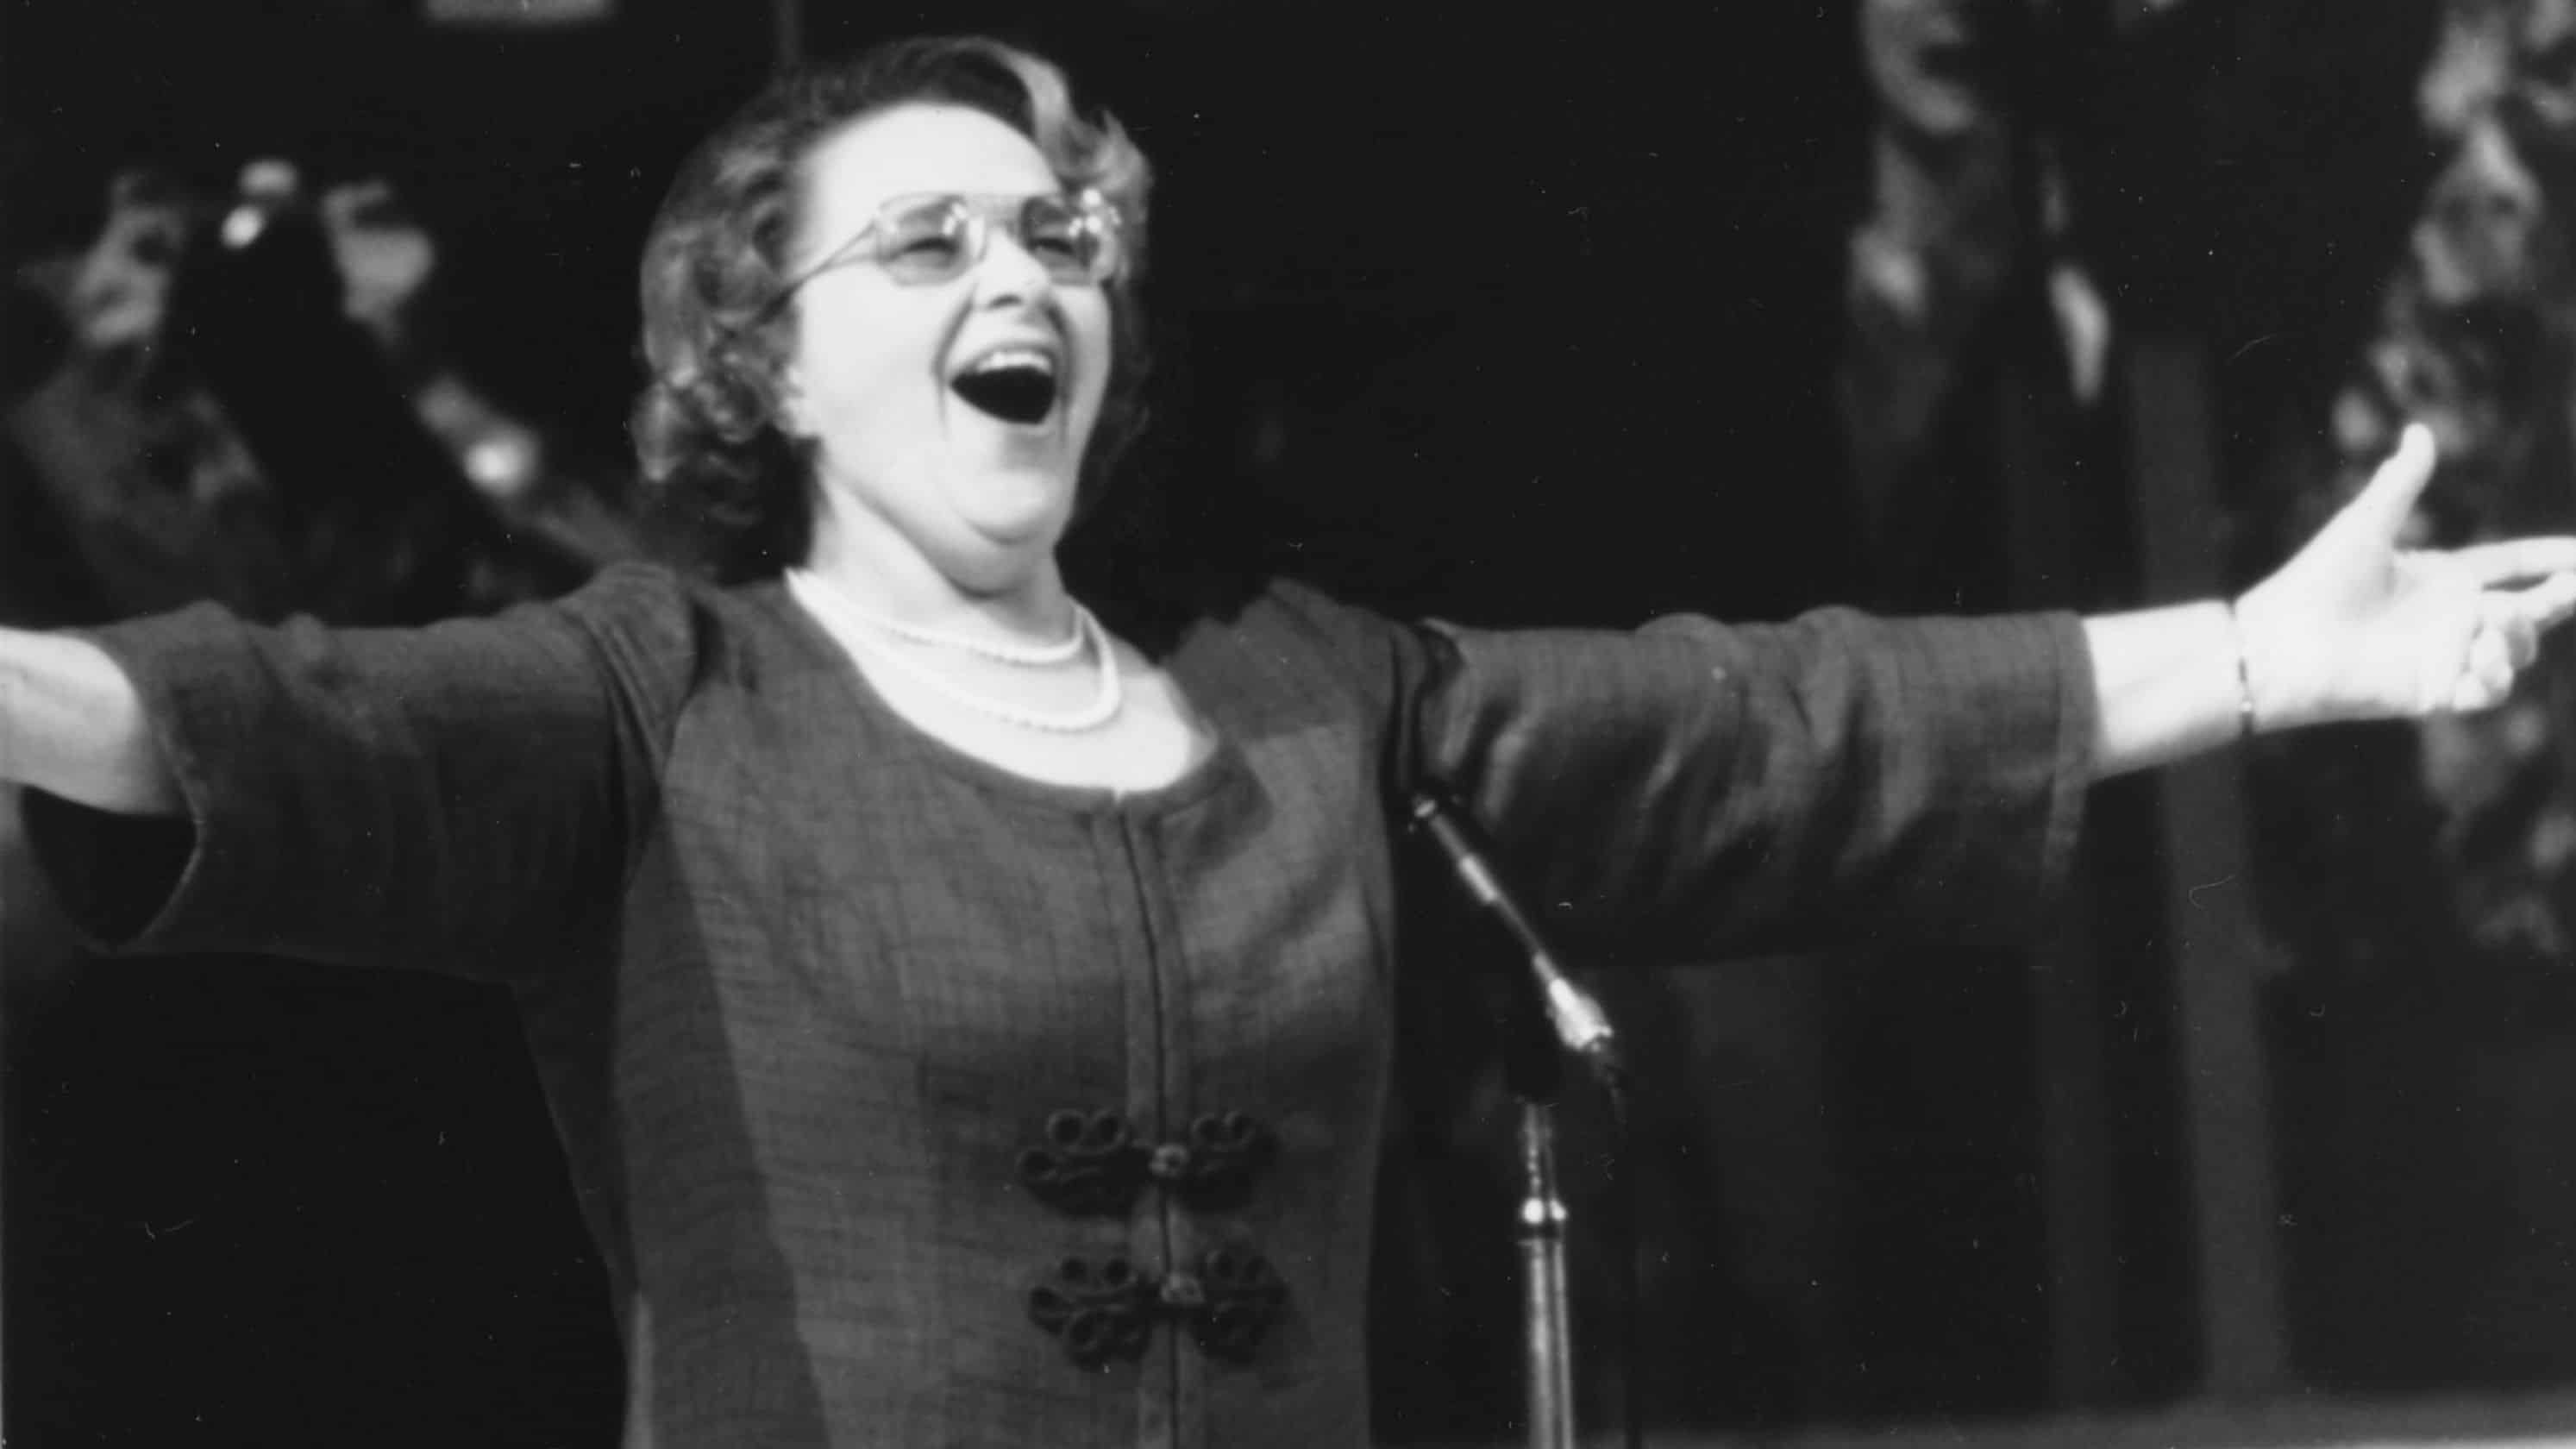 Mayor: Kate Smith’s “God Bless America” Is STAYING